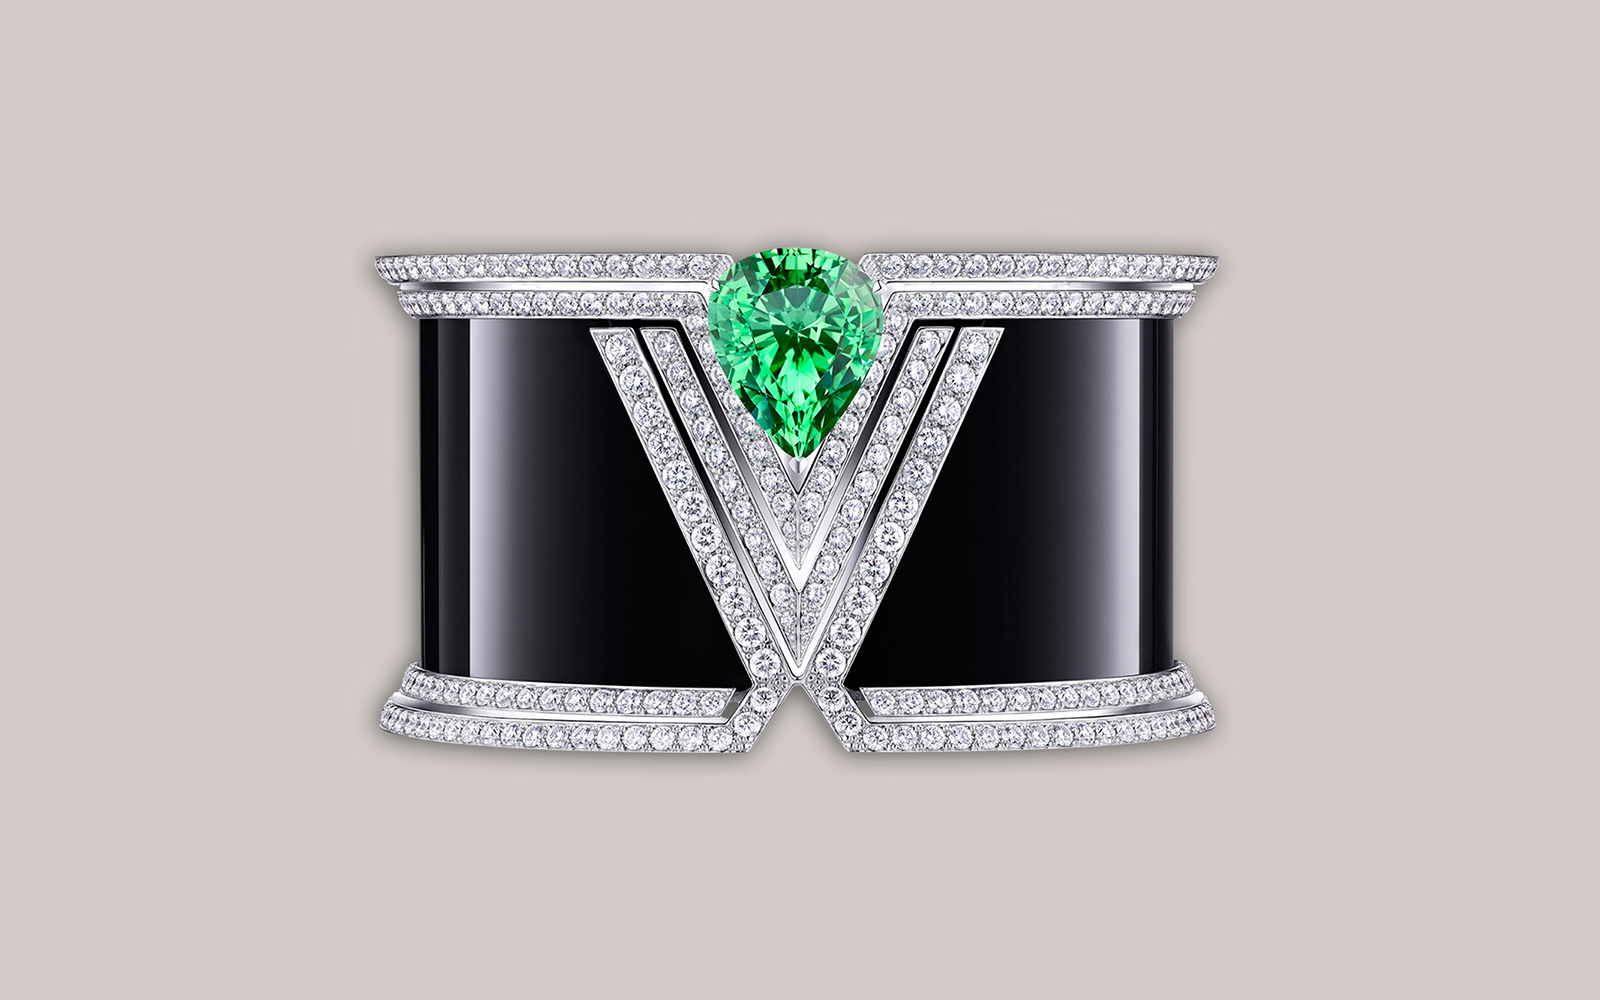 The new Acte V high jewellery collection by Louis Vuitton